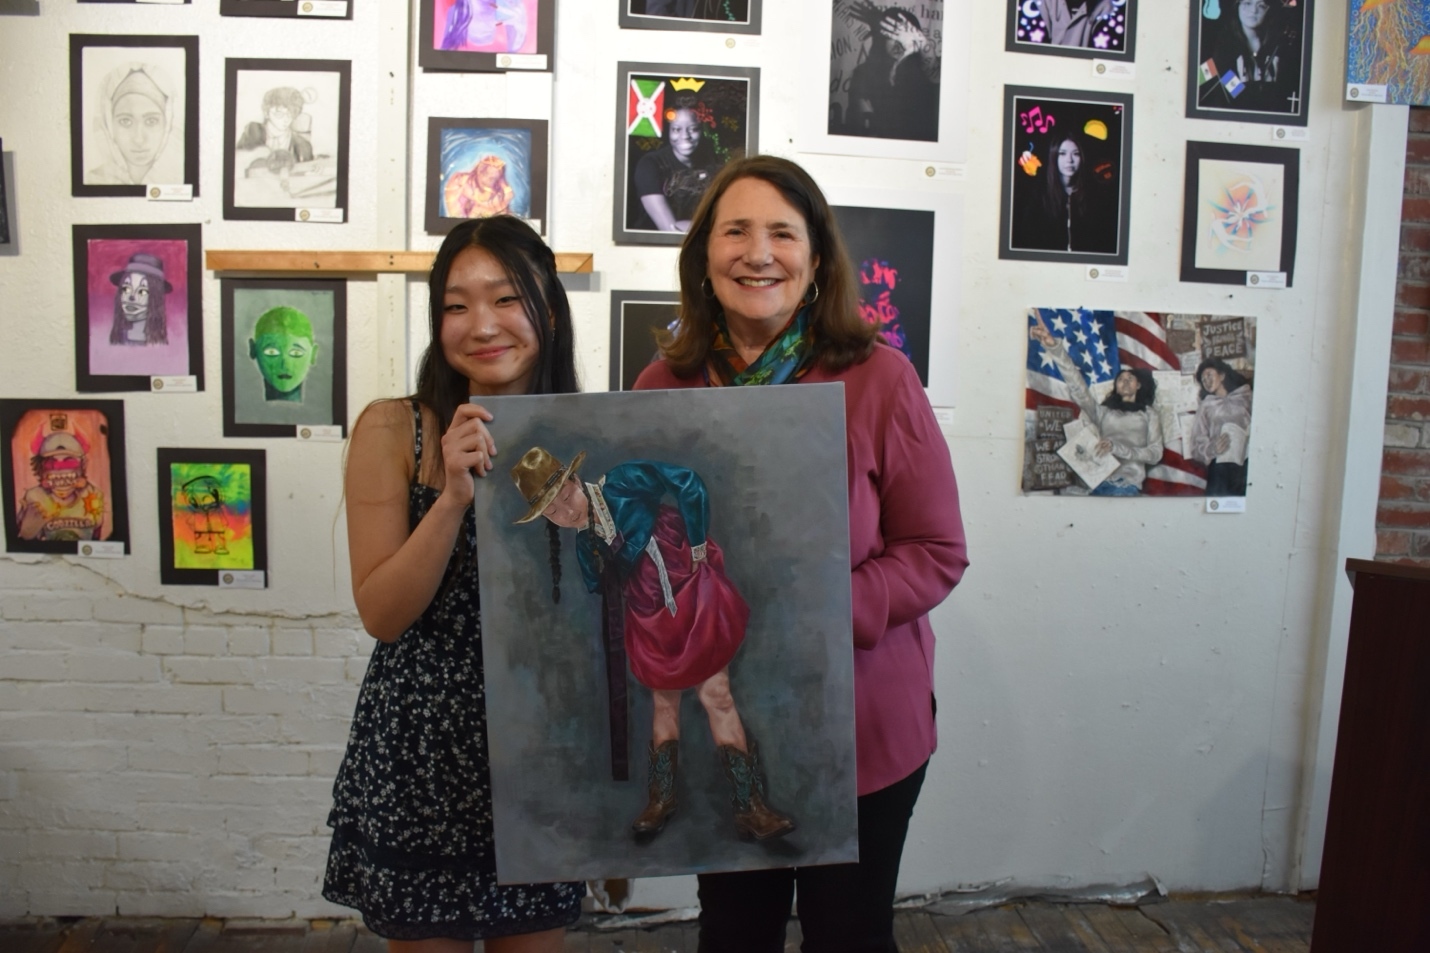 Congressional art contest winner Madison Lee and Congresswoman Diana DeGette together hold Lee's award winning painting.